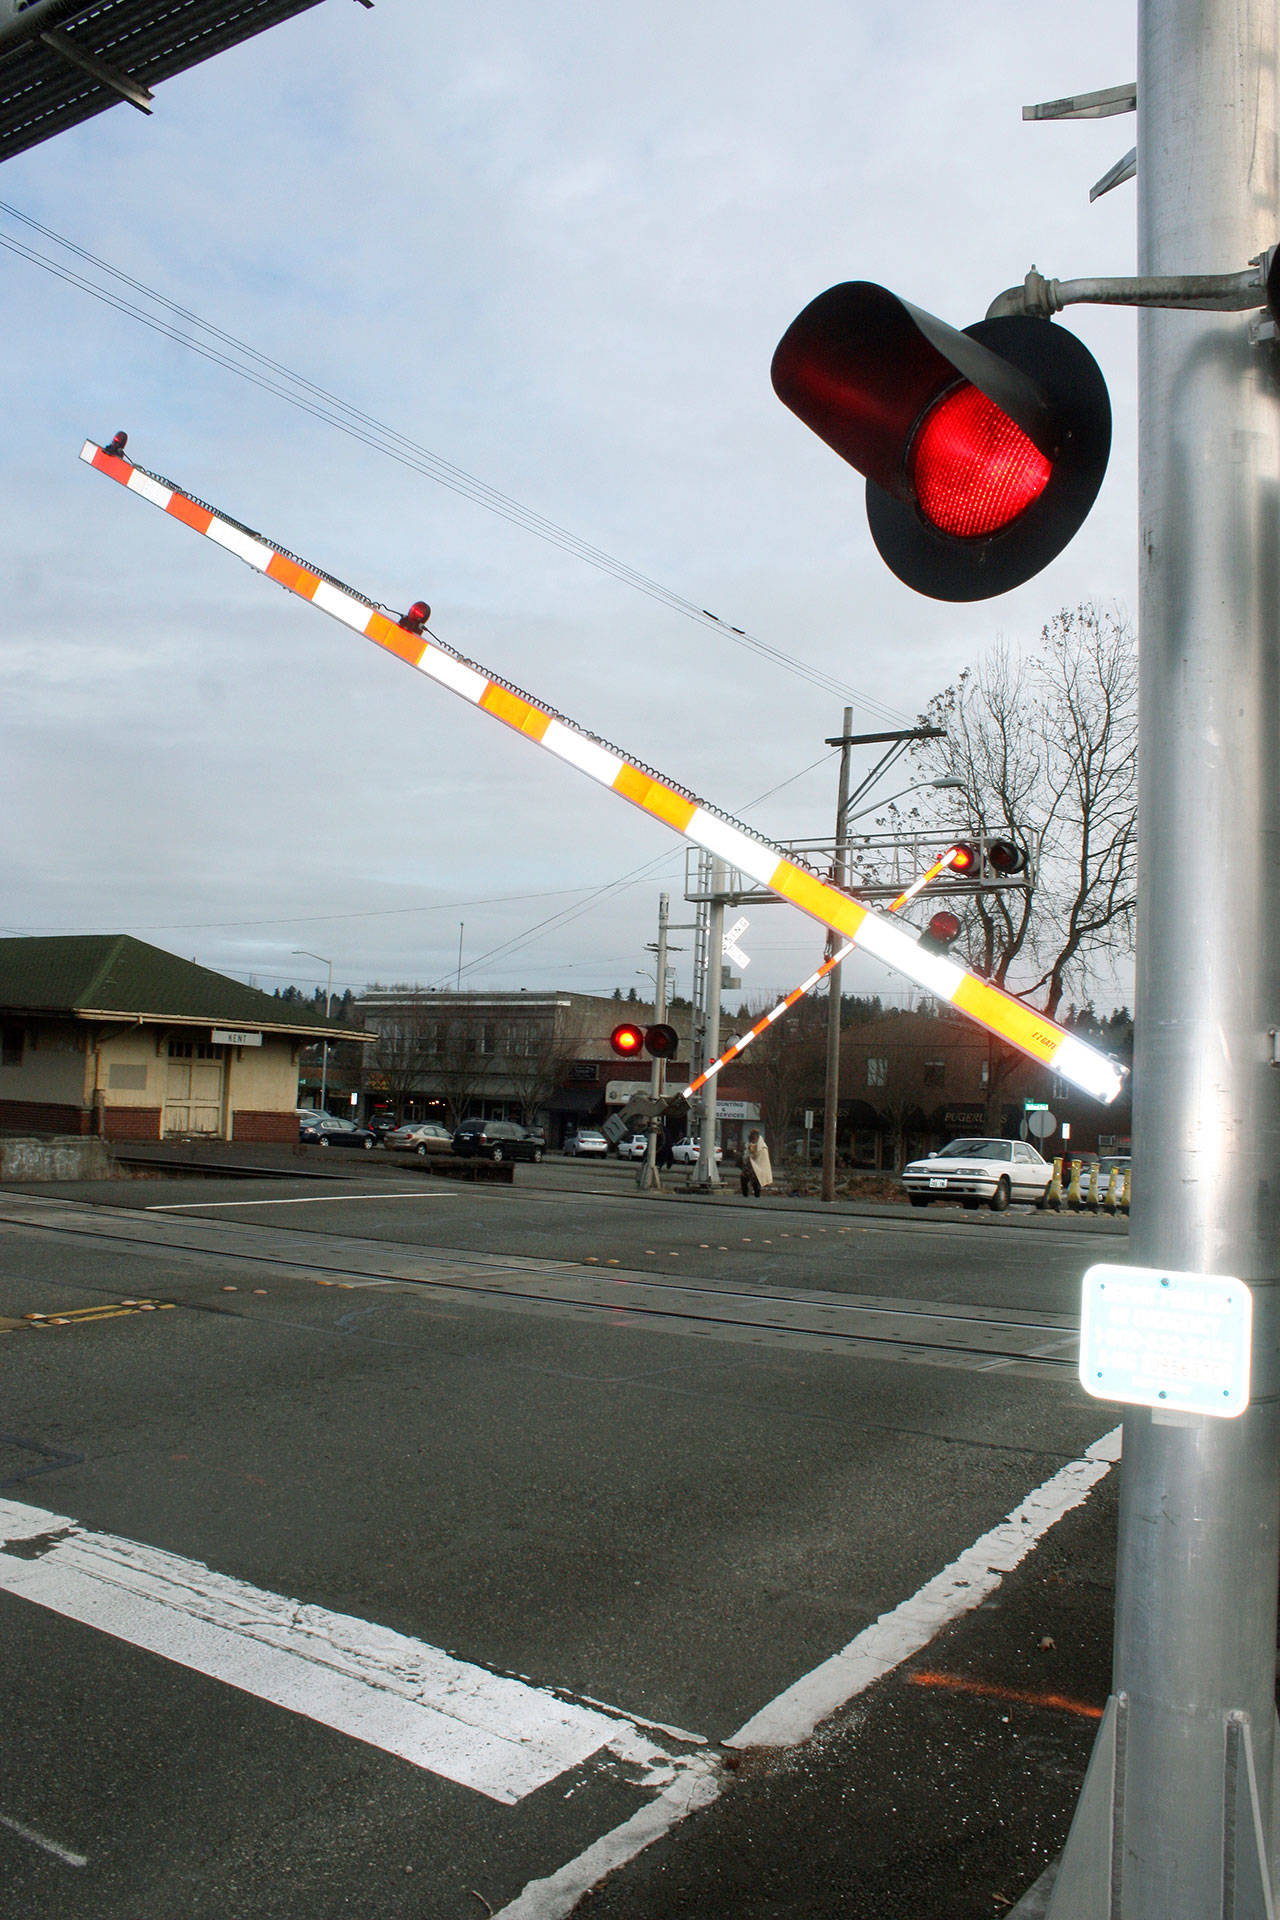 BNSF Railway to conduct more crossing gate tests